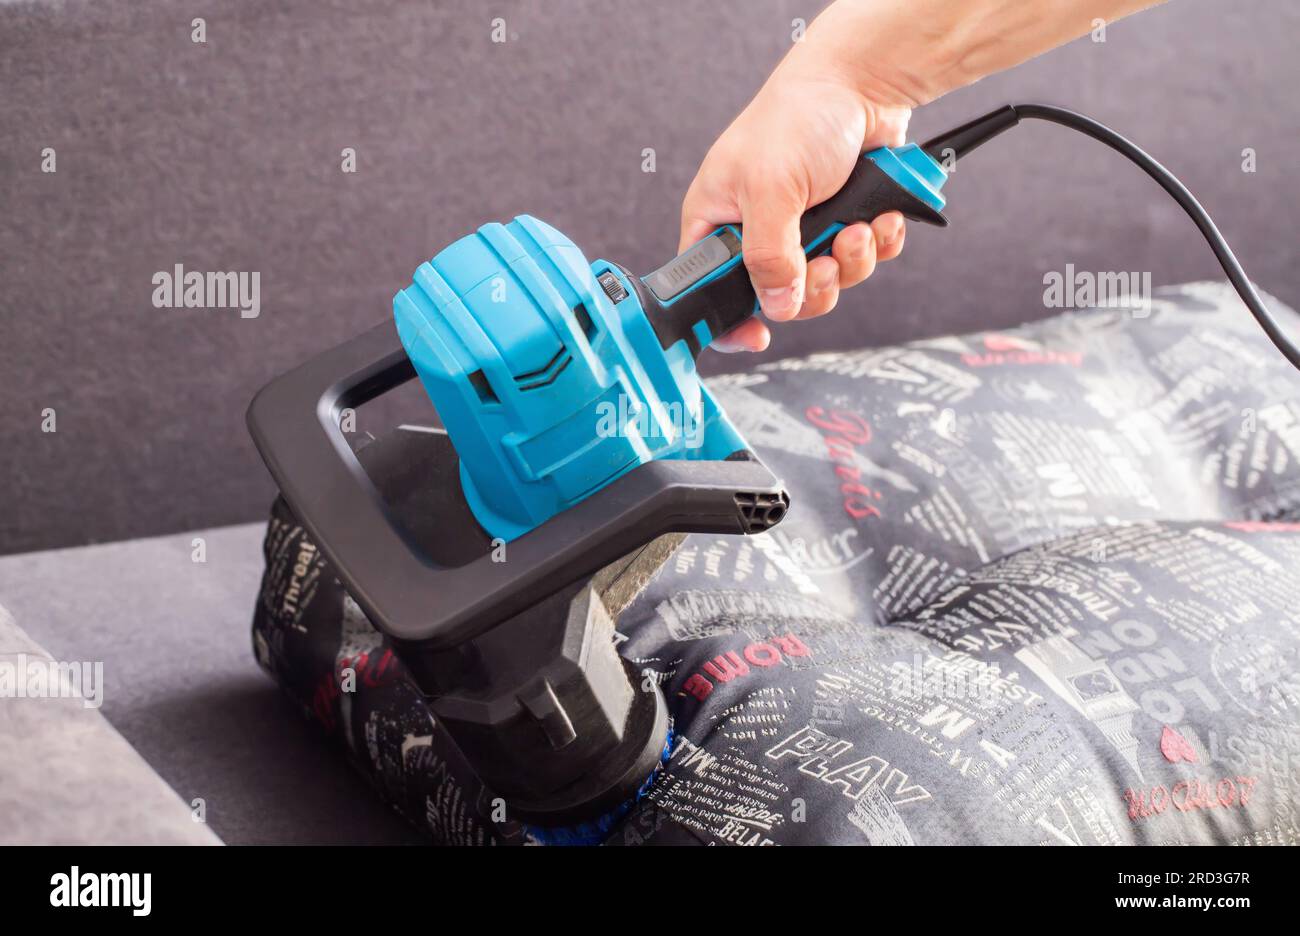 Cleaning sofa cushions with a special electric brush. Dry cleaning of upholstered furniture, close-up. Stock Photo